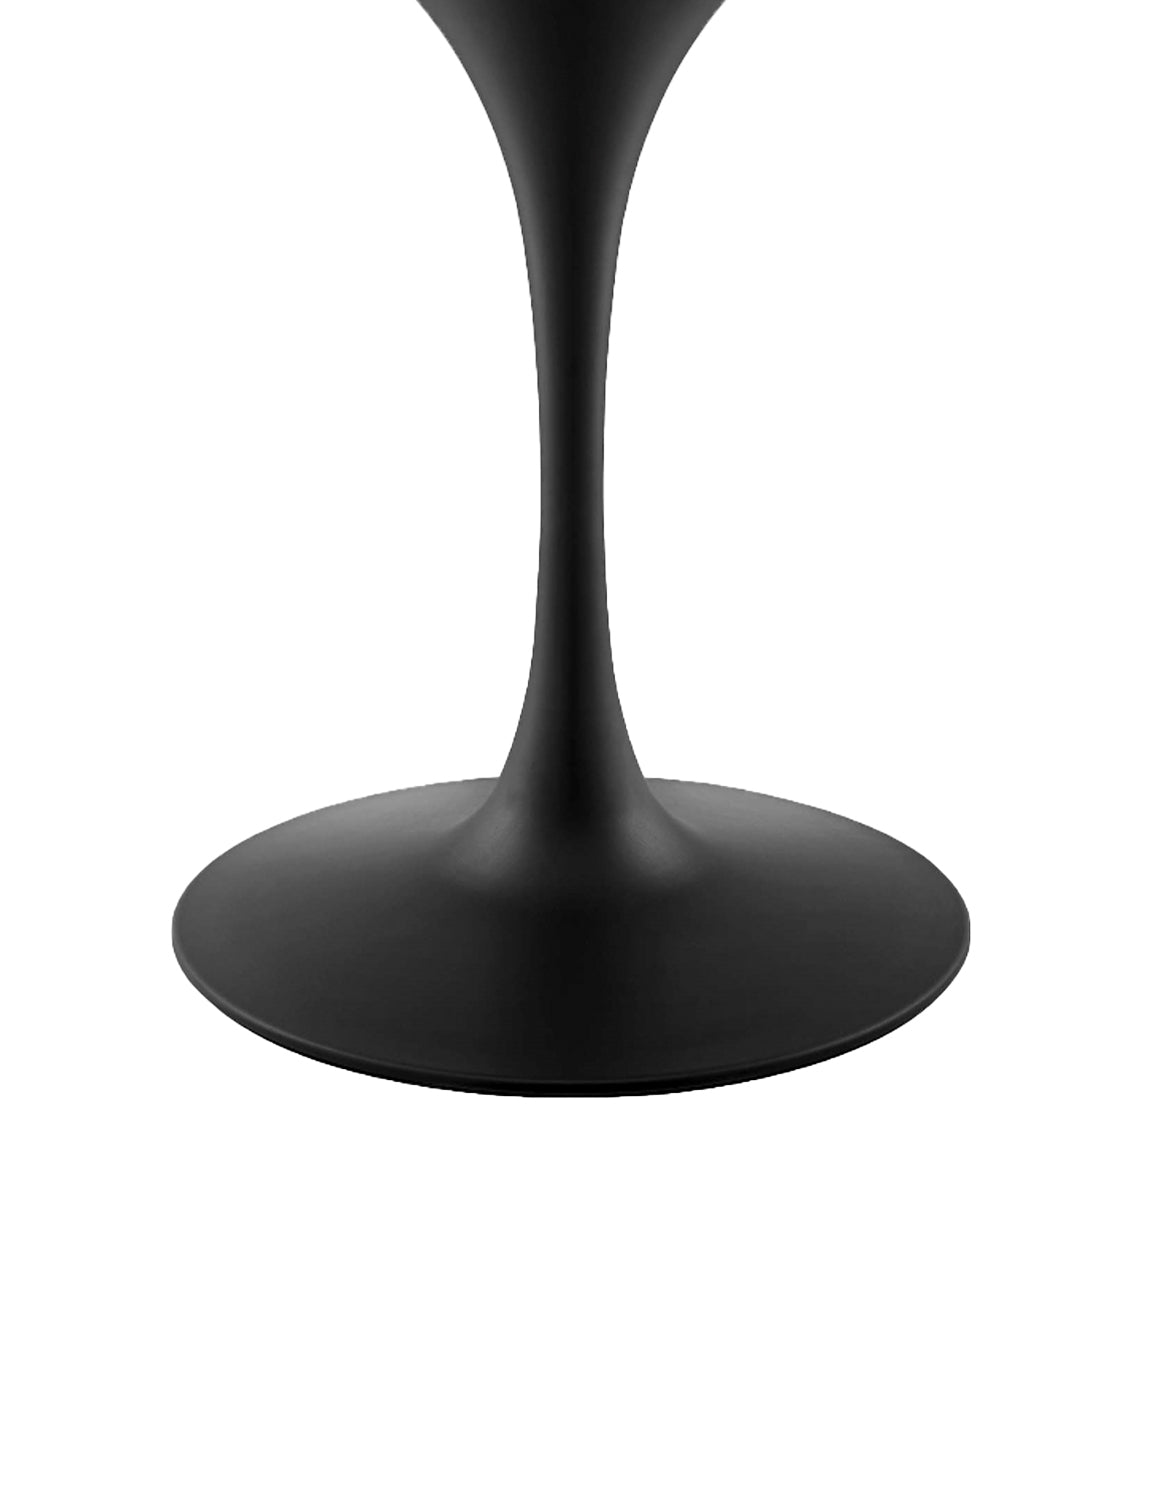 Lily Oval Marble Dining Table, black base